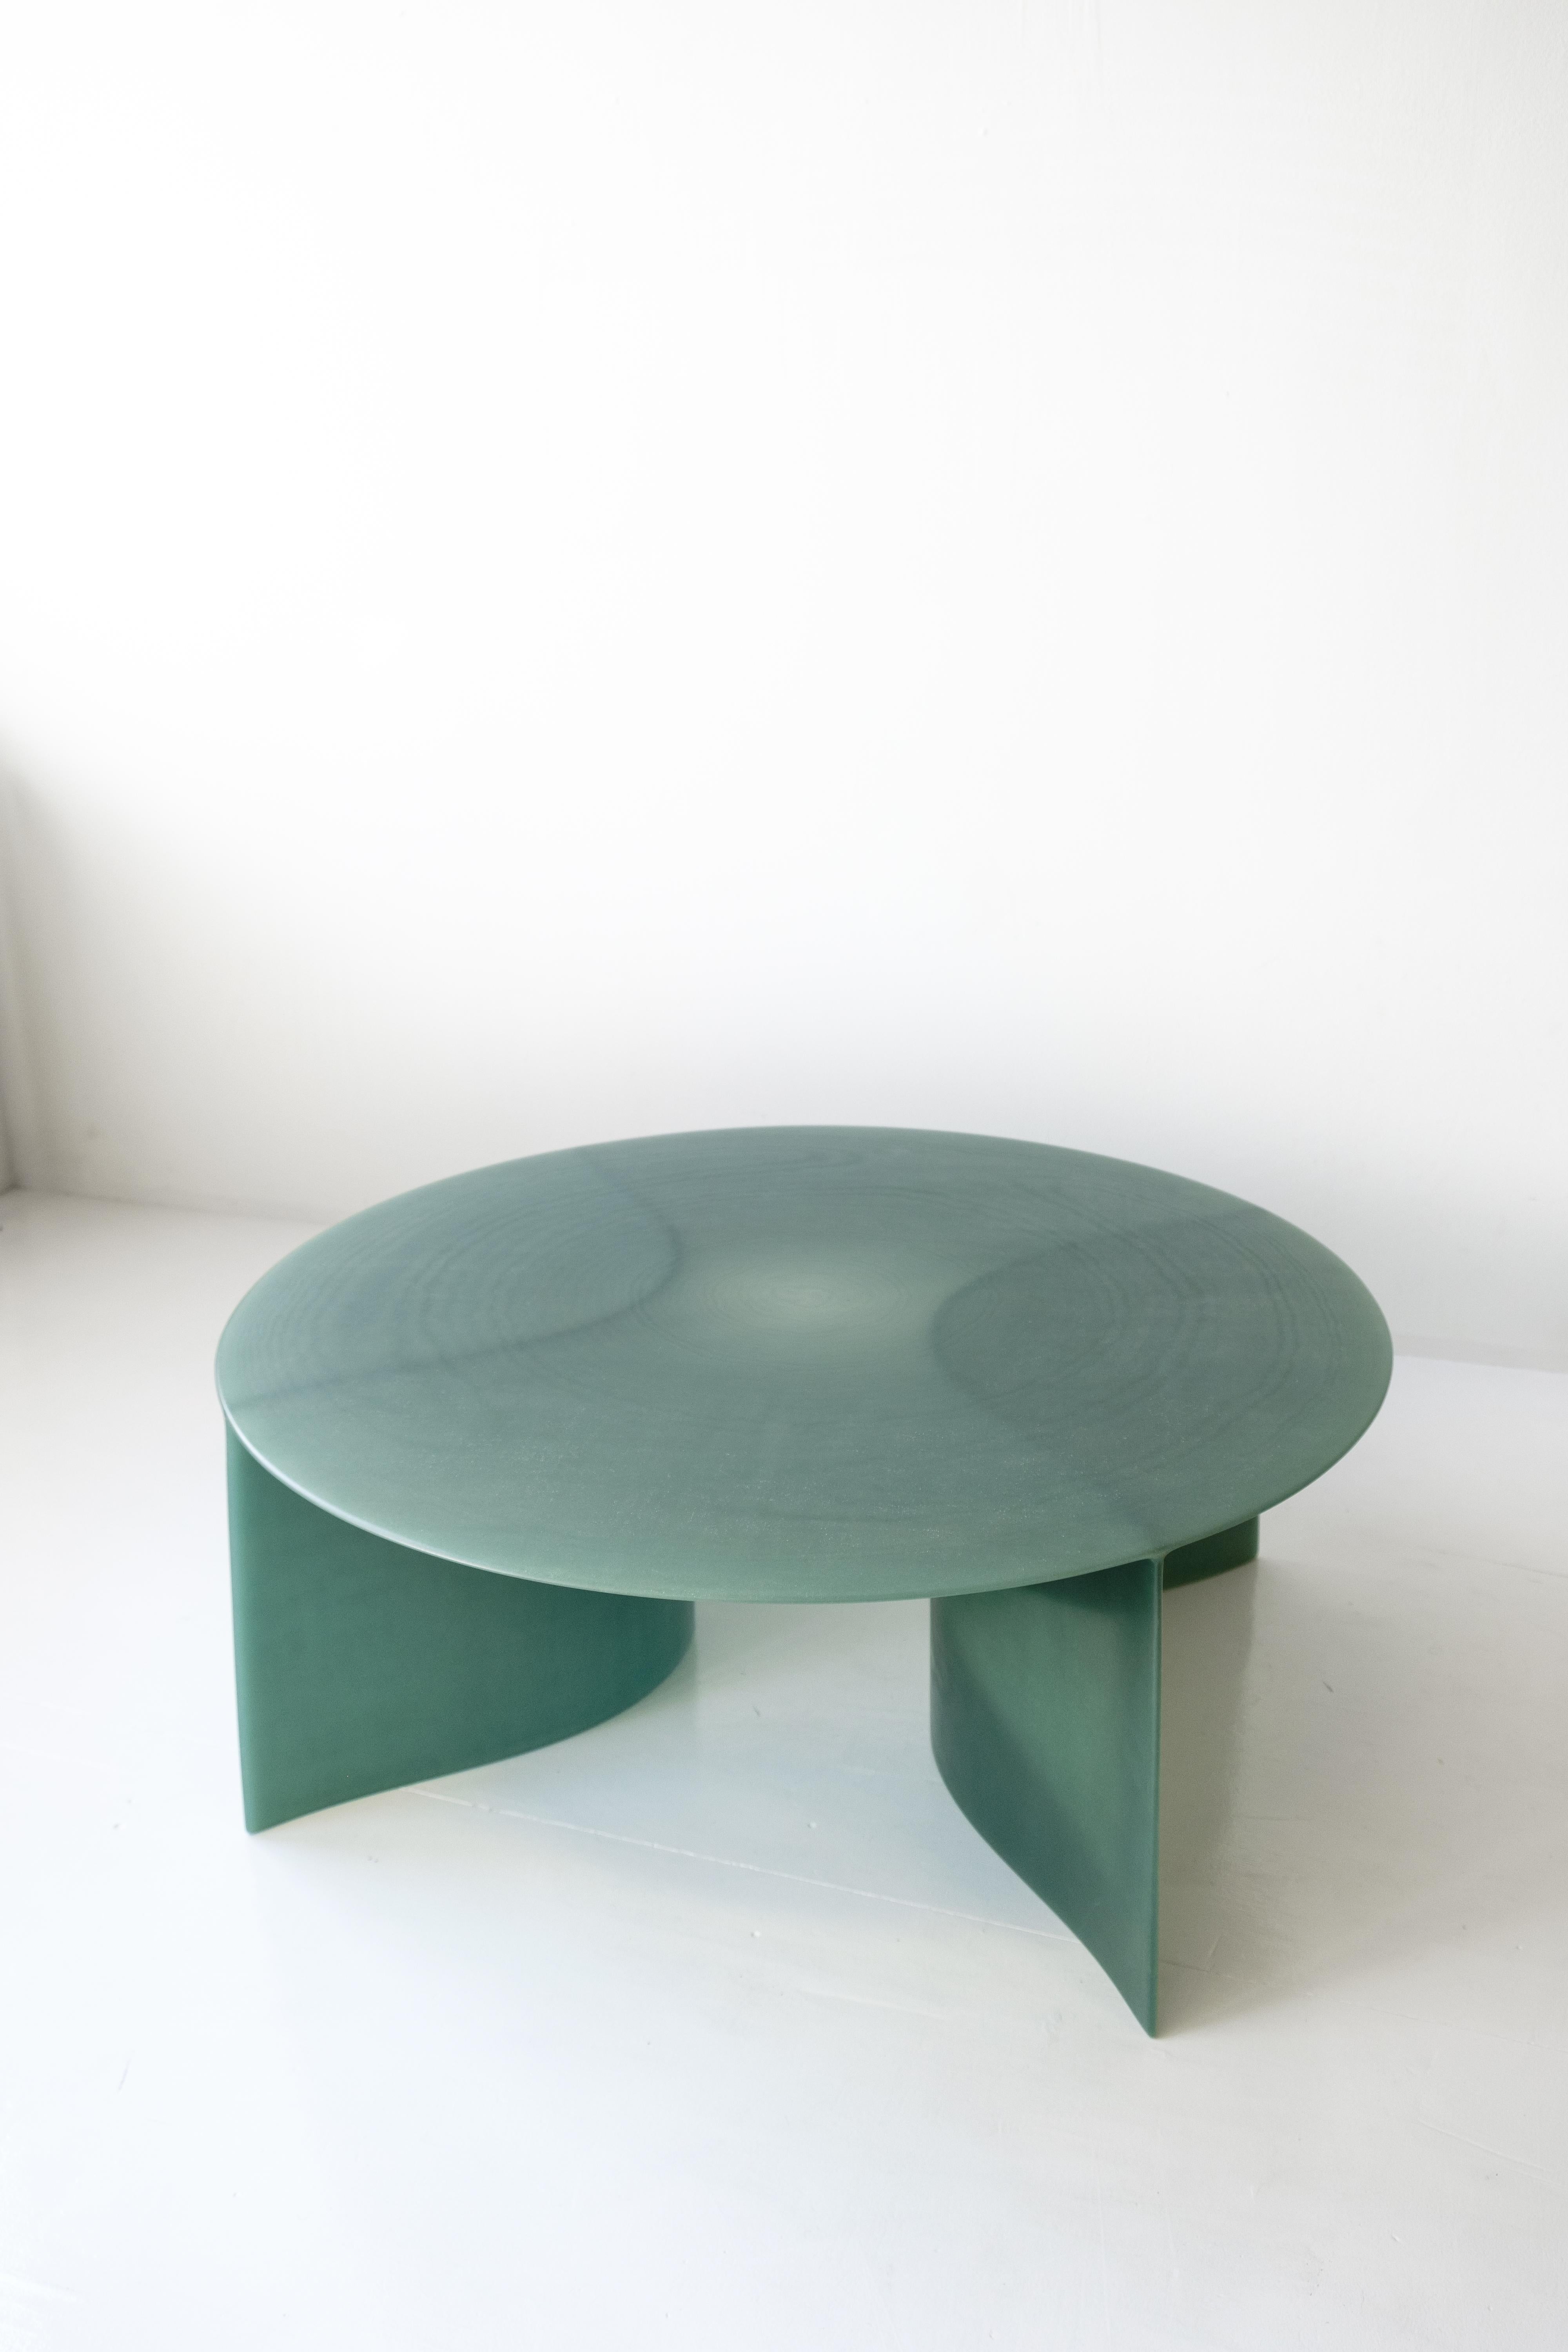 Contemporary Green Fiberglass, New Wave Coffee Table Round 100cm, by Lukas Cober For Sale 3